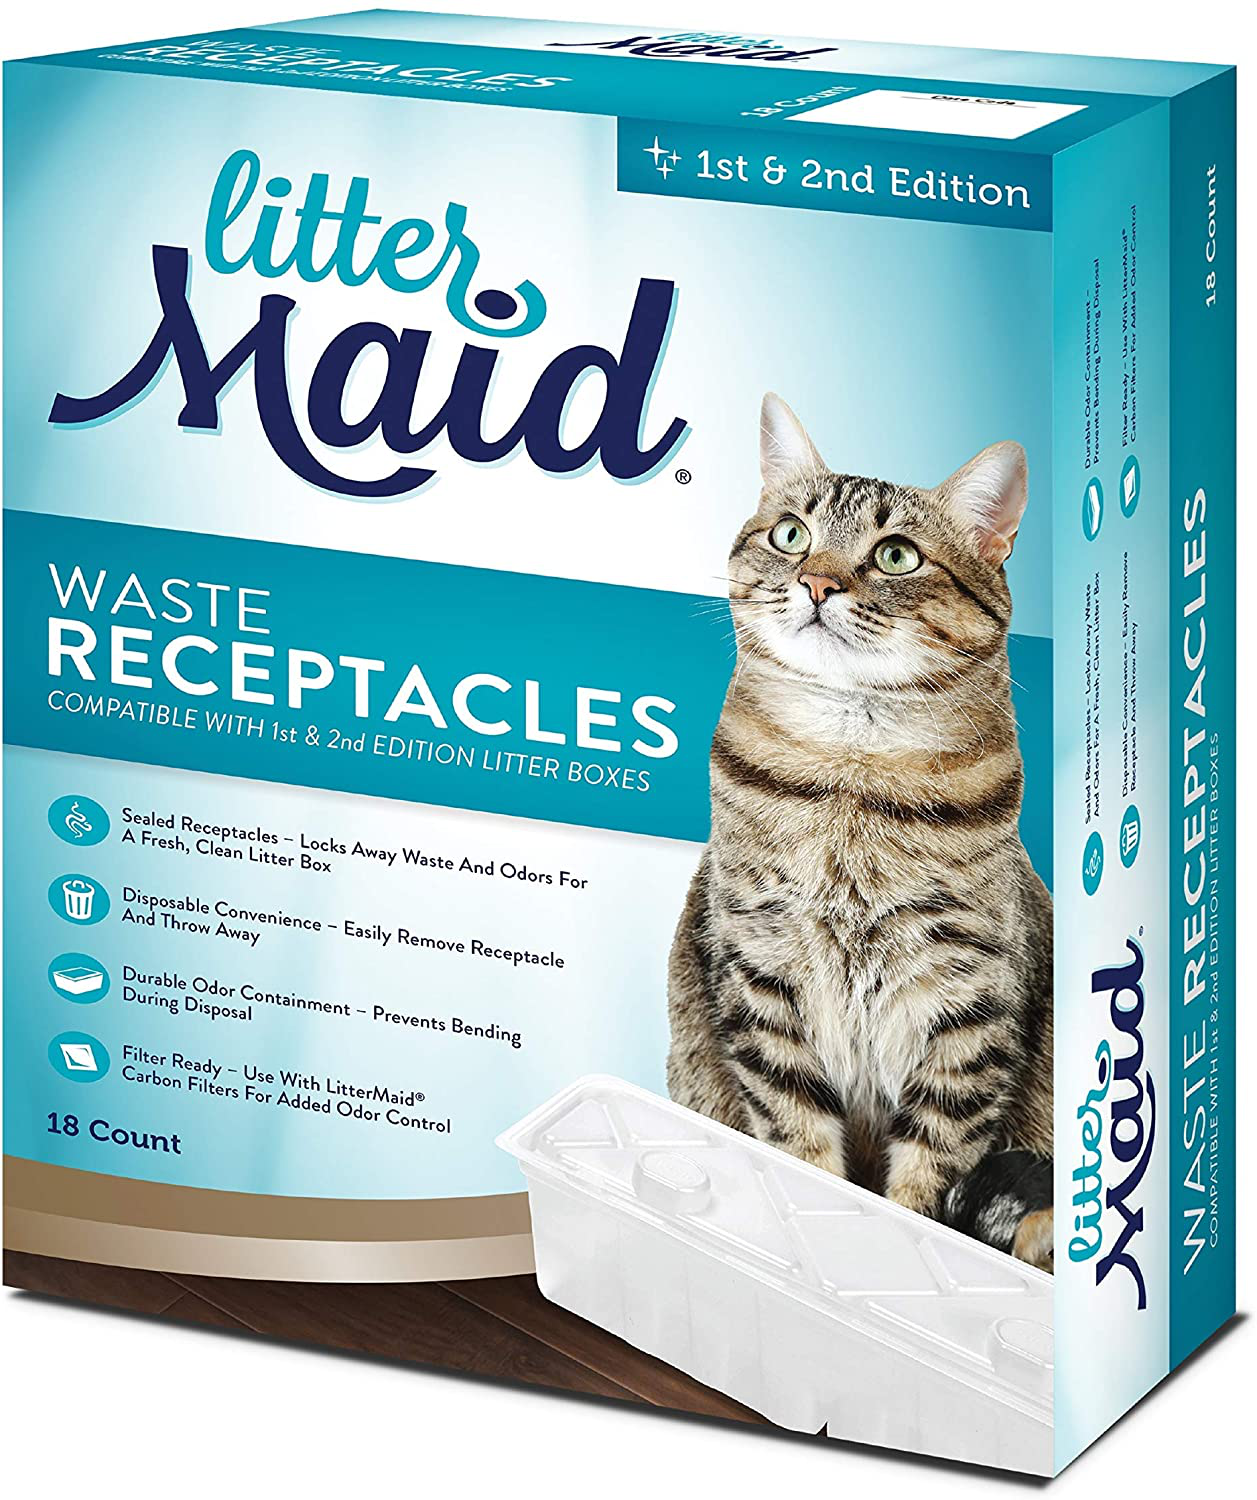 Littermaid Litter Box Waste Receptacles, Disposable/Sealable Waste Receptacles for Automatic Litter Boxes